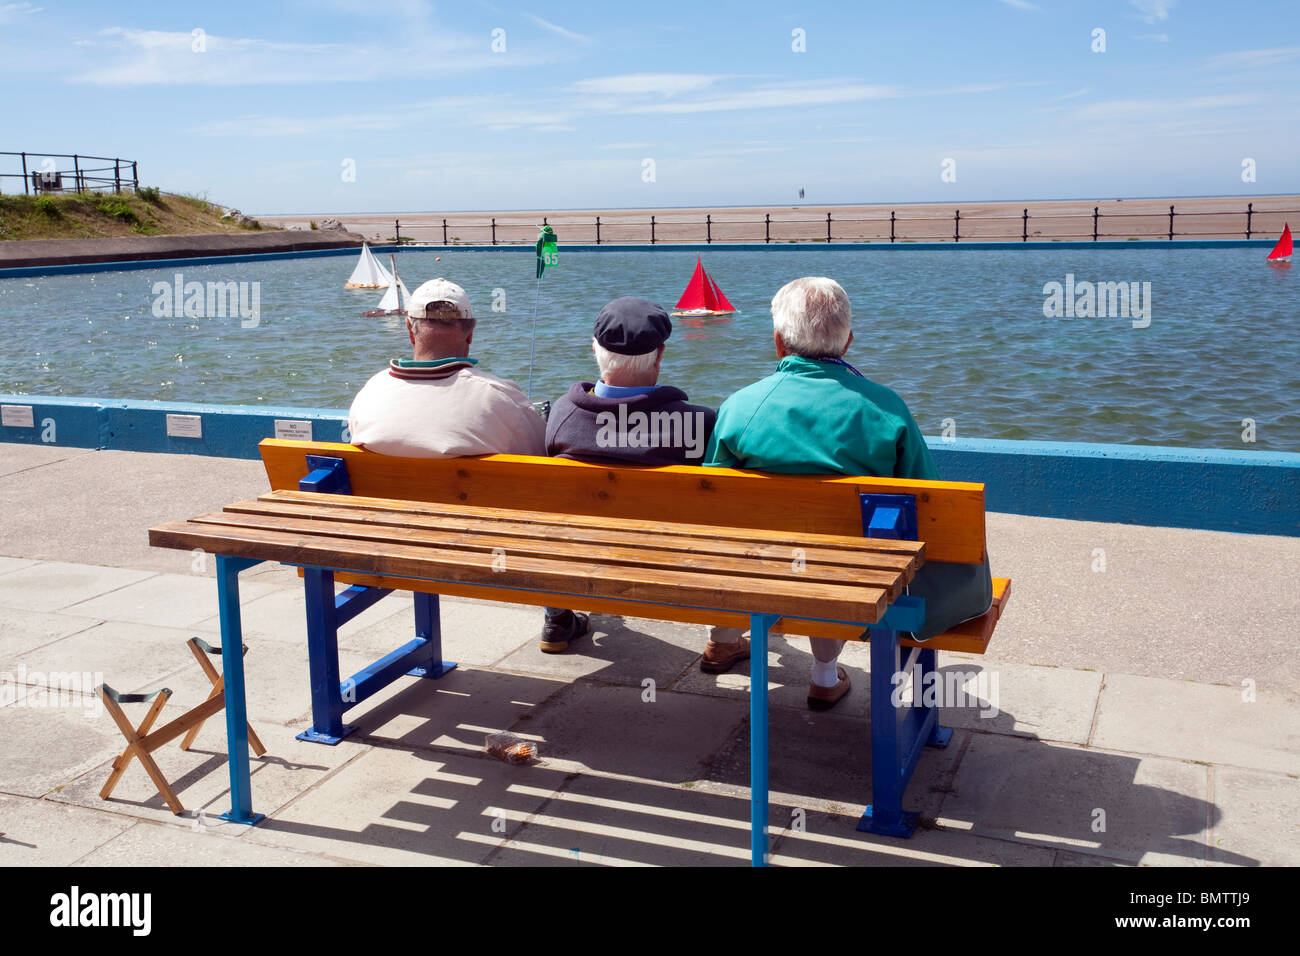 Hoylake model boating lake in the sunshine. Three gentlemen enjoying the weather and the thrill of a popular pastime in the sun. Stock Photo